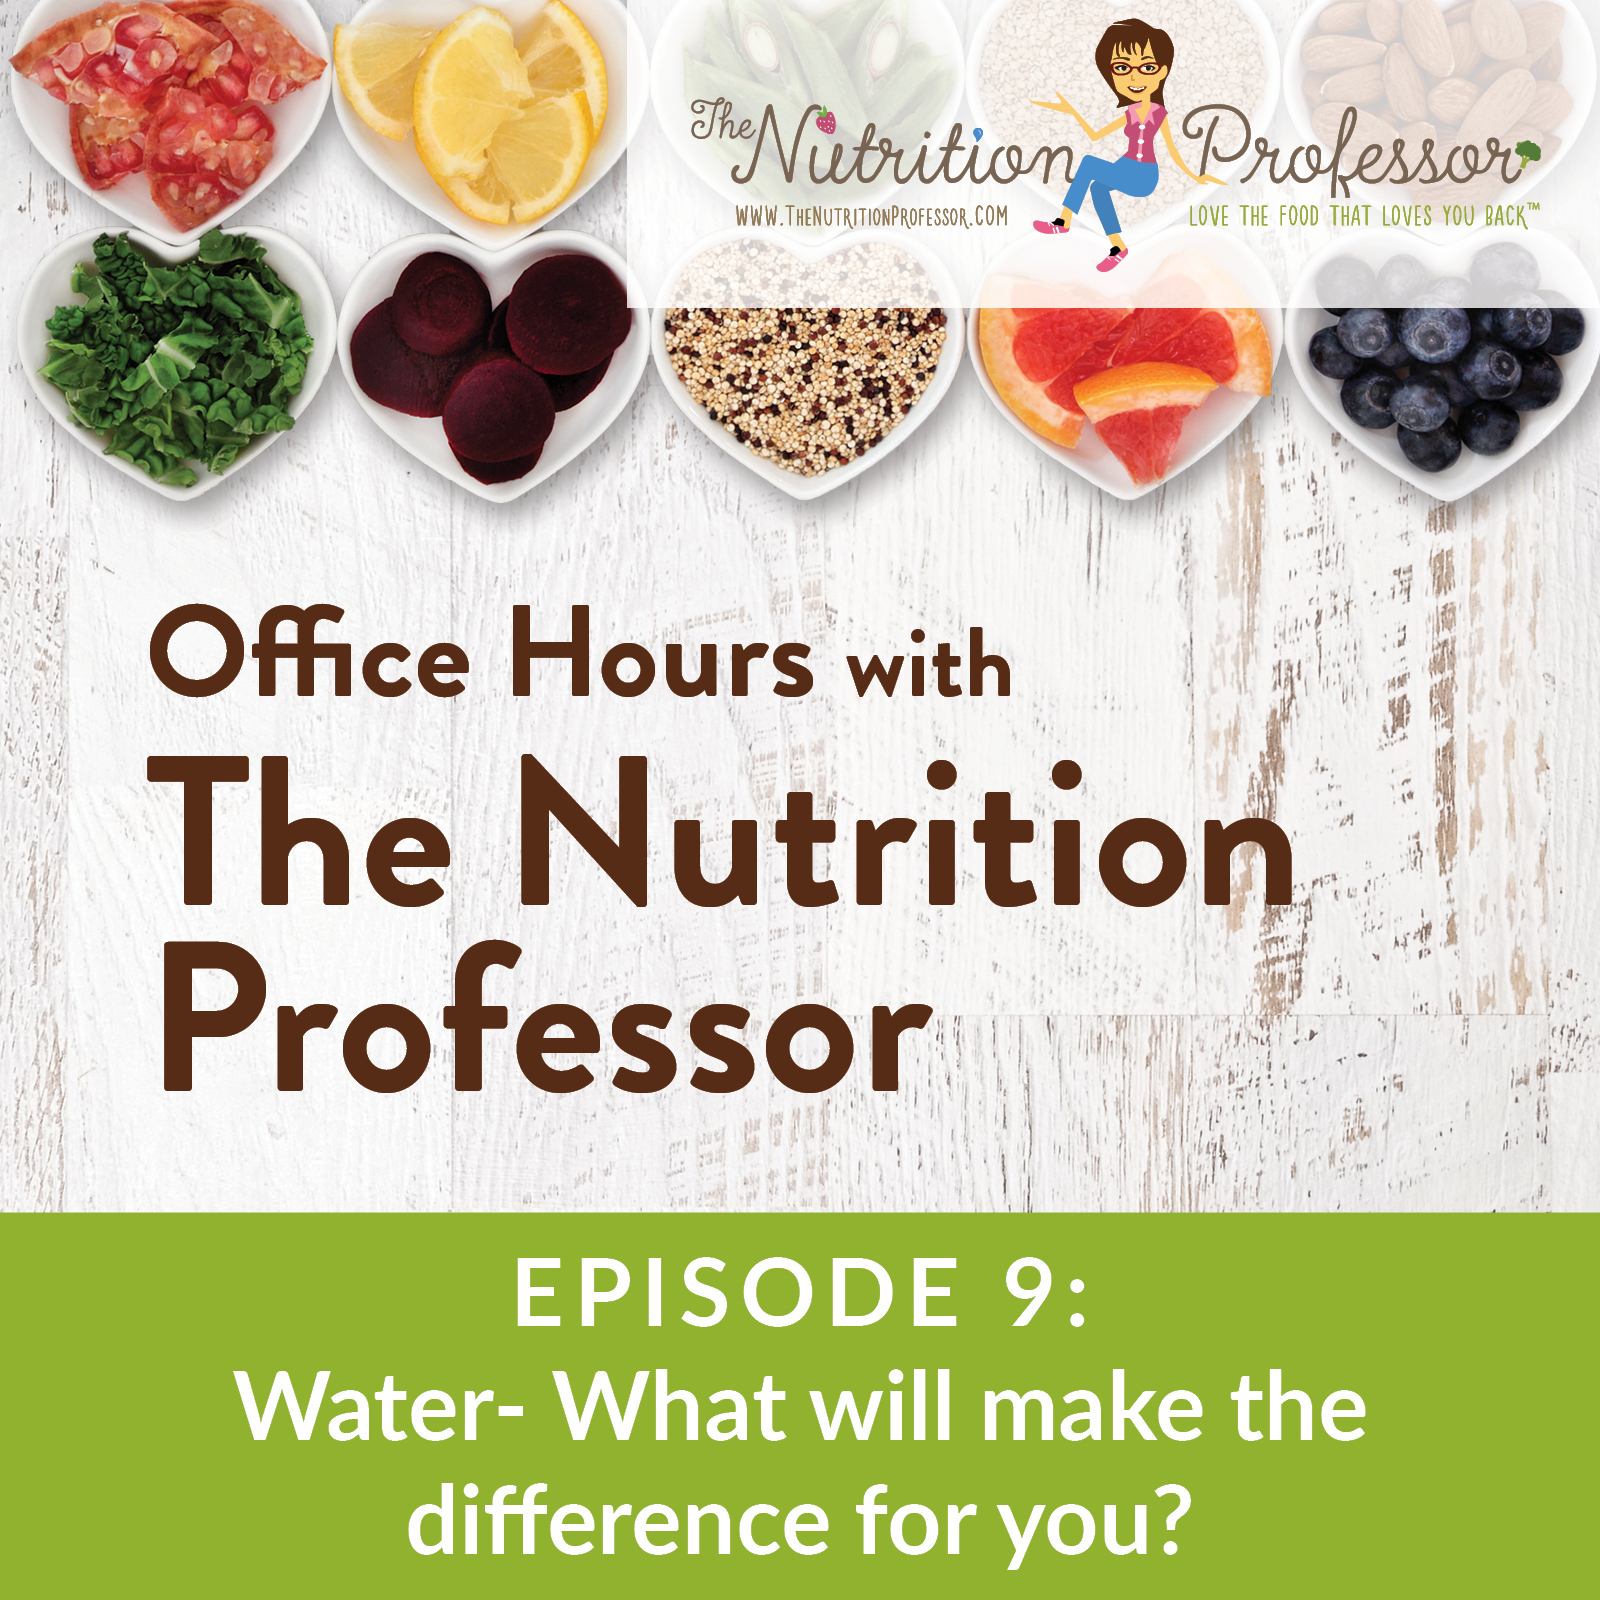 Podcast Episode 9: Water – What will make the difference for you?